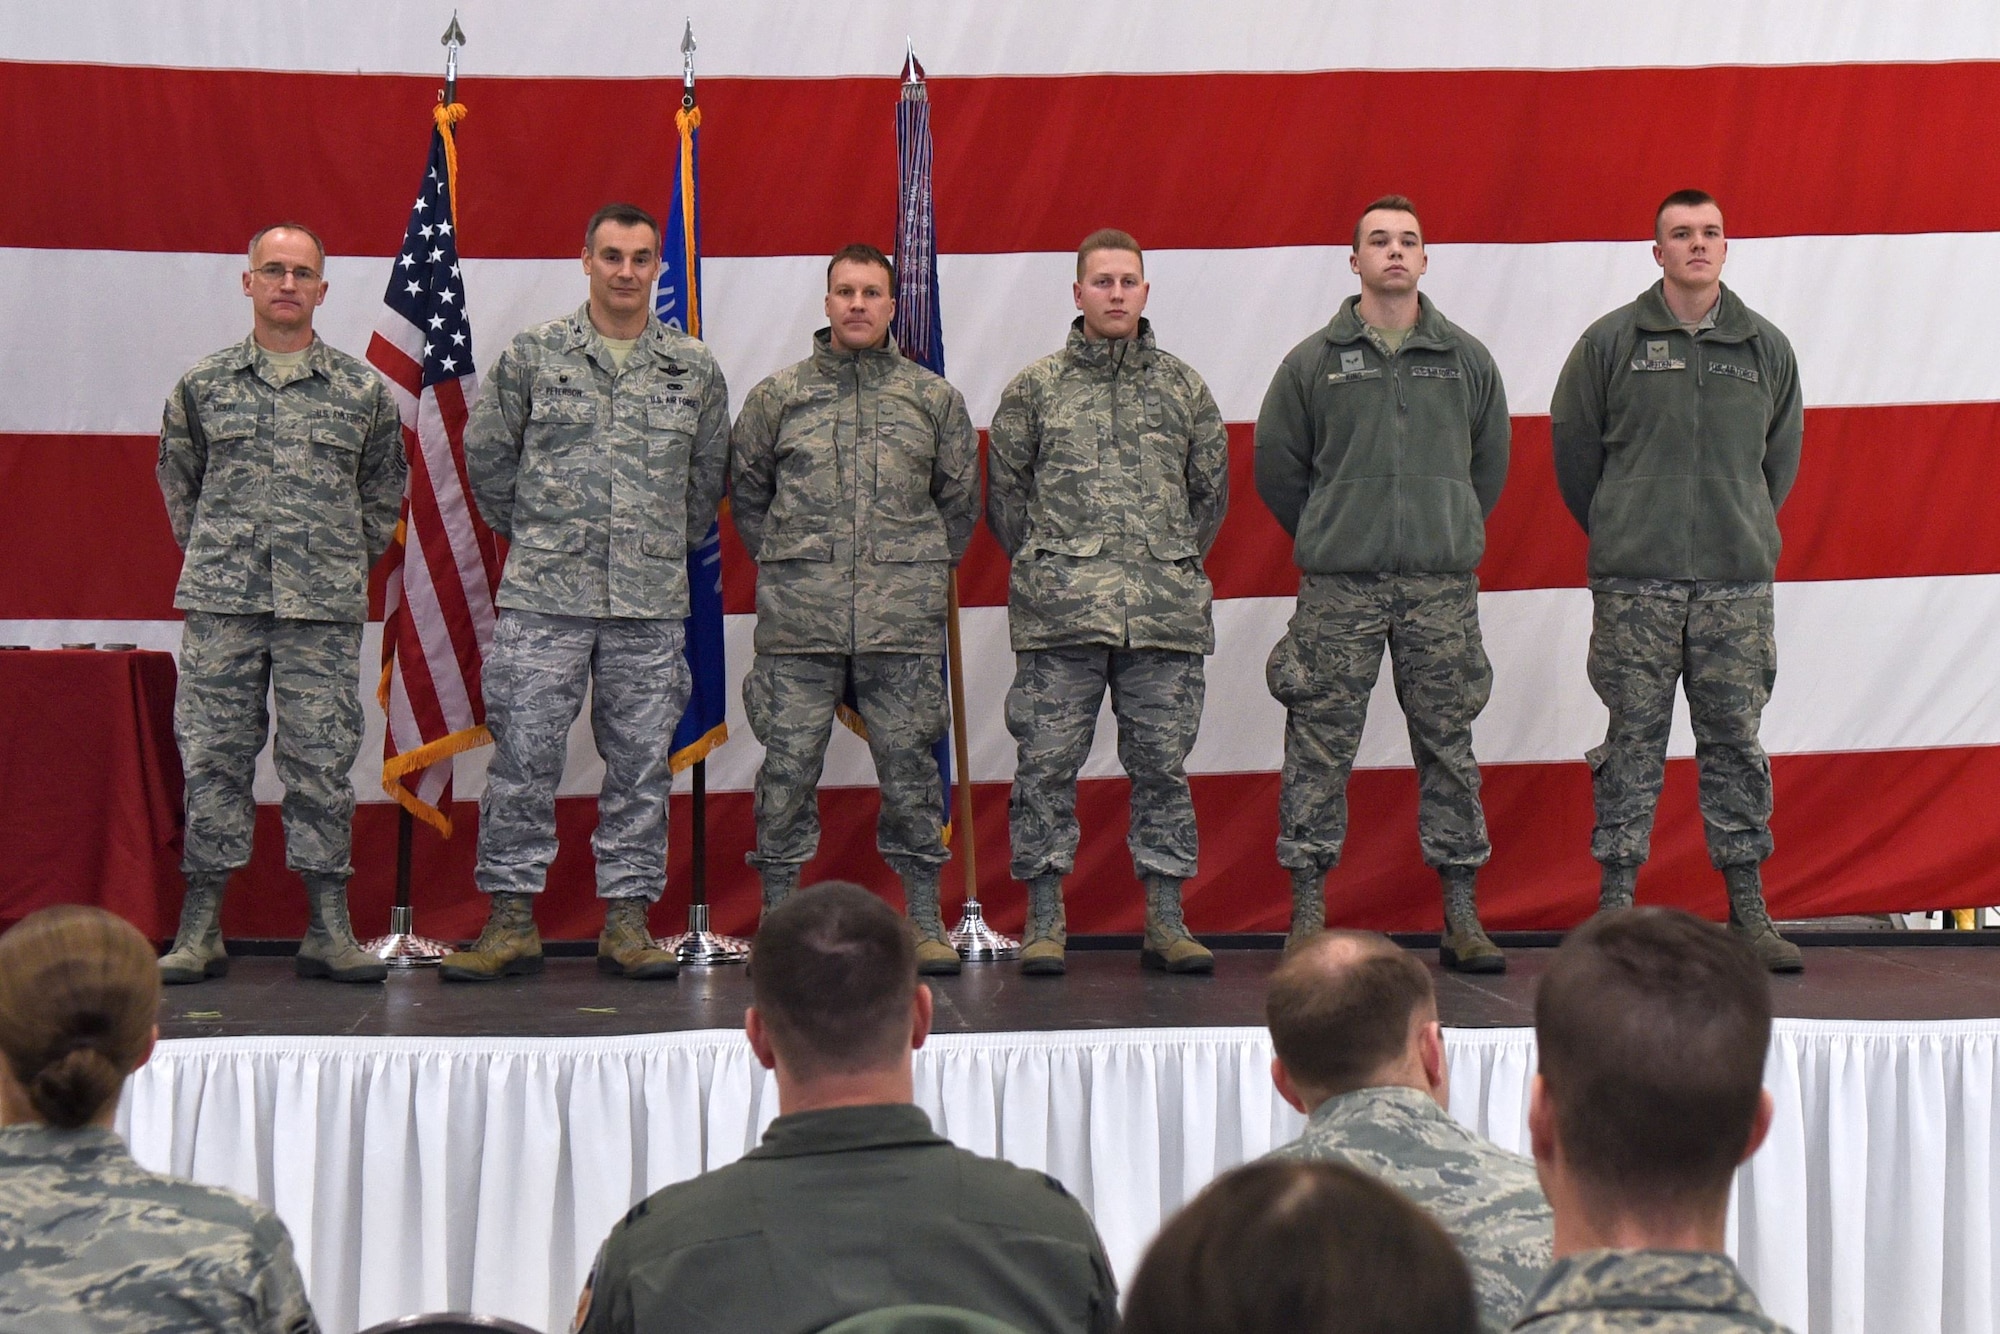 Command Chief Master Sgt. James McKay (left) joins 115th Fighter Wing Commander Col. Erik Peterson to recognise new unit members who earned the title of honor graduate in Basic Military Training during the unit's annual awards ceremony at Truax Field in Madison, Wisconsin, Jan. 6, 2017. The ceremony highlighted Airman from throughout the unit who displayed exemplary skill and leadership in the performance of their duties both at home, and in deployed locations around the world. (U.S. Air National Guard photo by Tech. Sgt. Andrea Rhode)